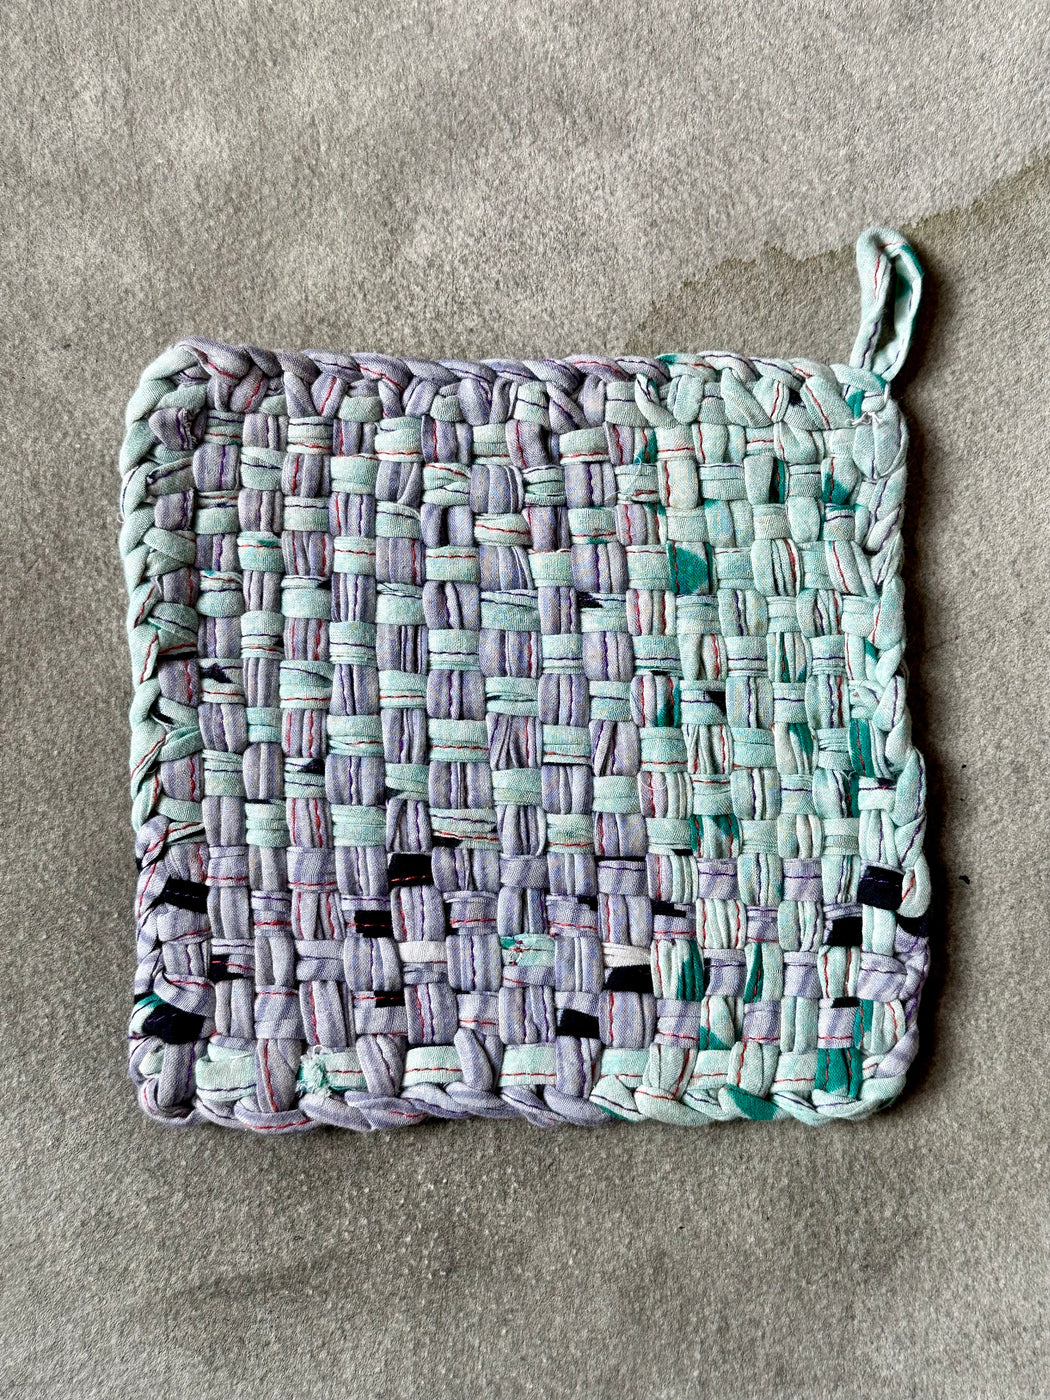 Woven Cotton Sari Potholders - Pale Pink and Green